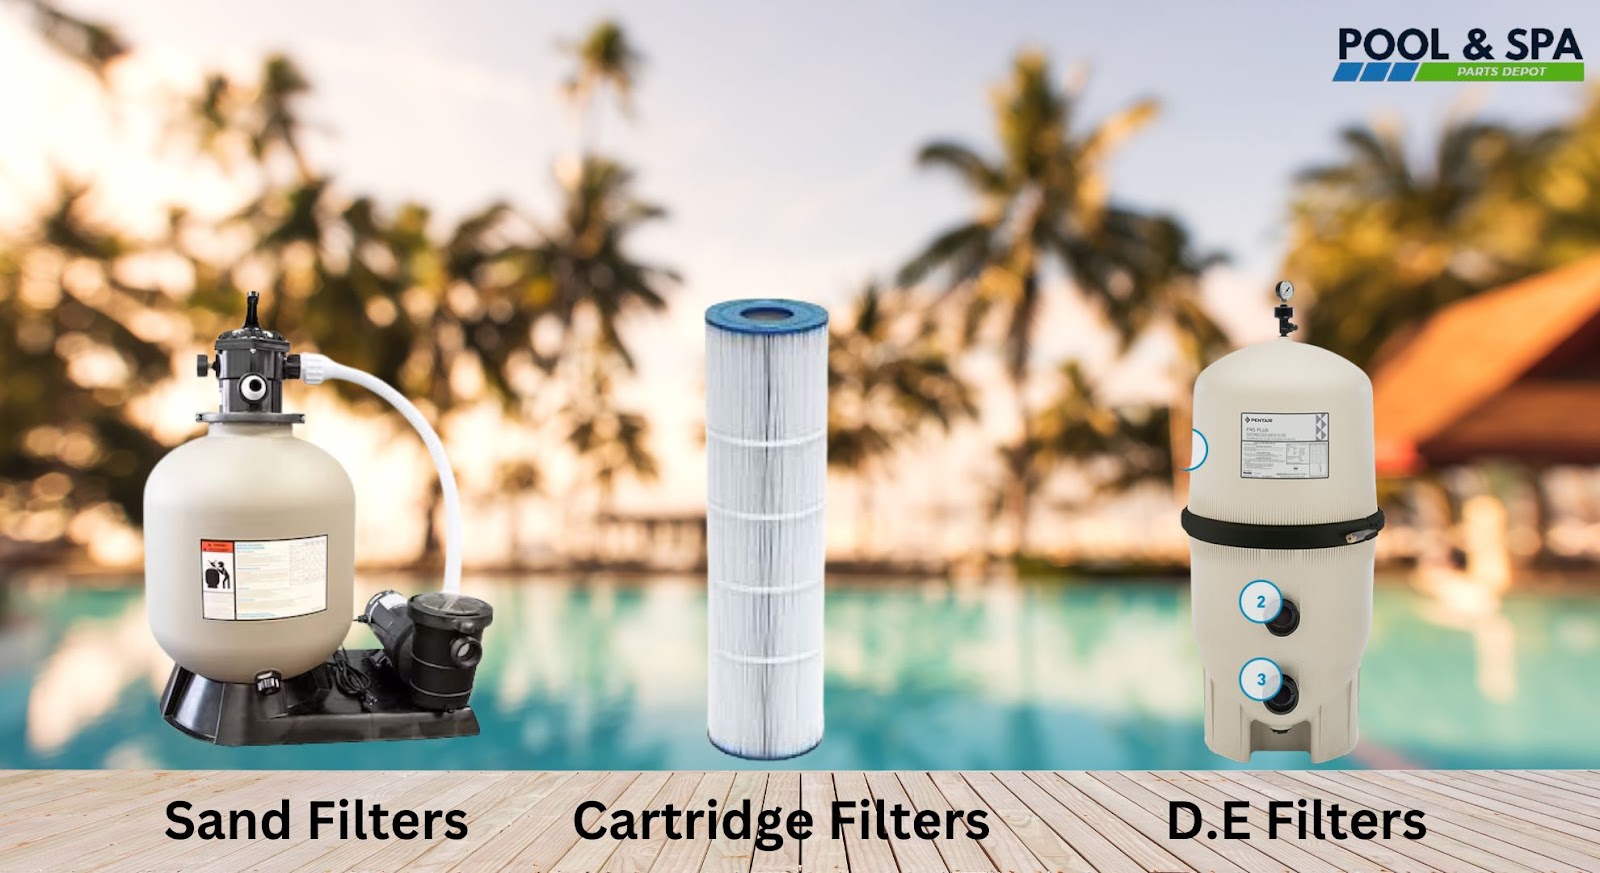 Types of pool filters